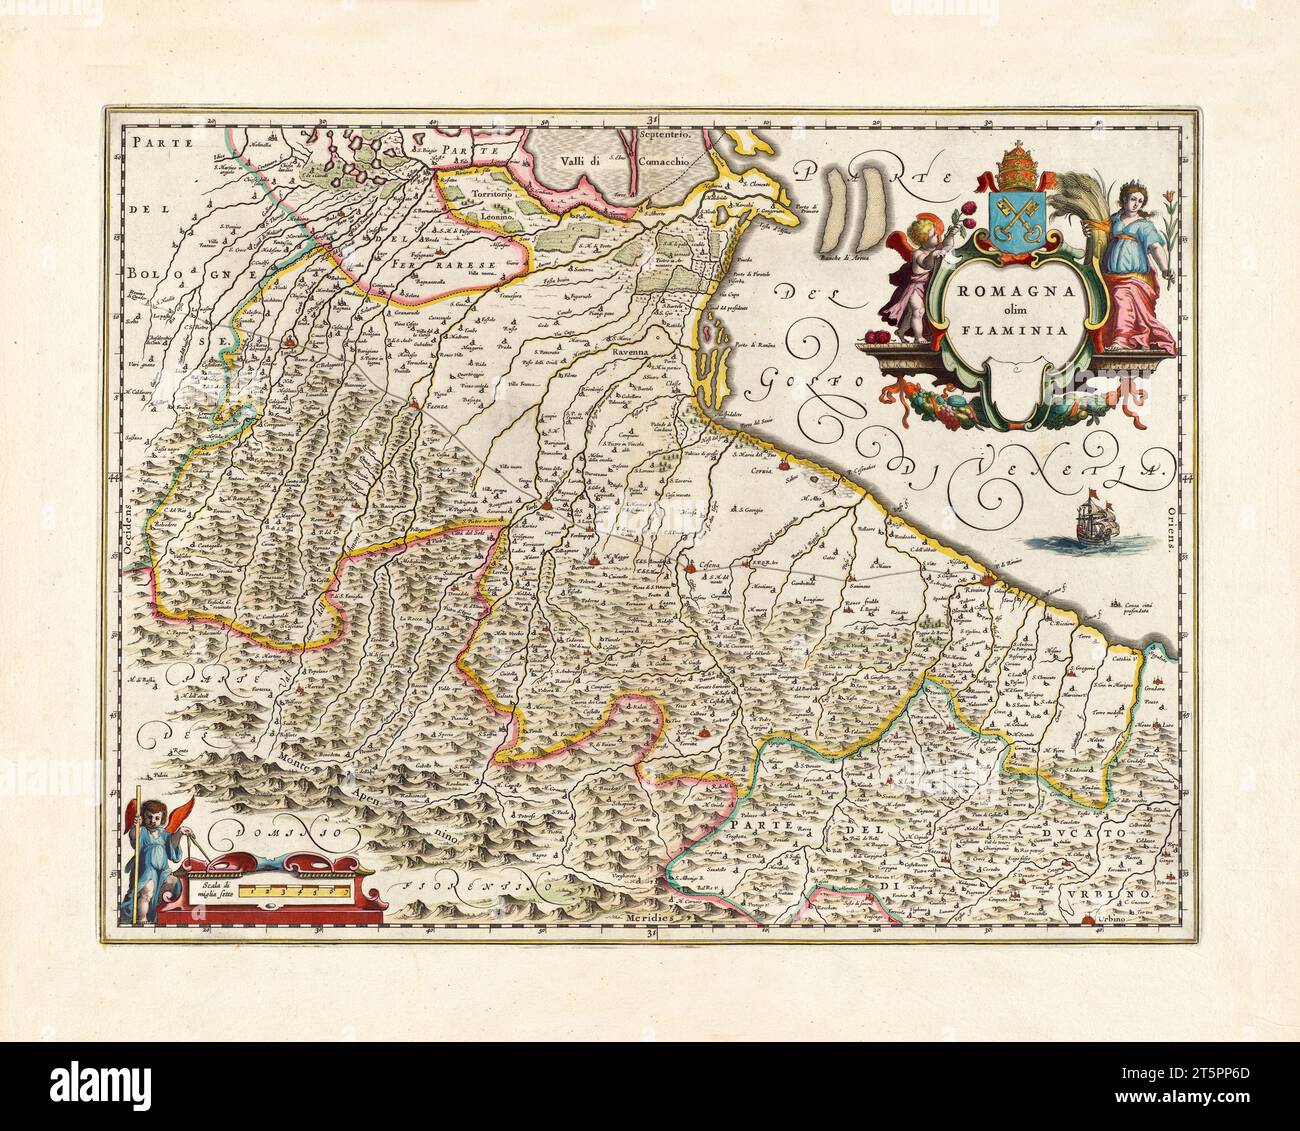 Old map of Romagna region, Italy. By Blaeu, publ. ca. 1840 Stock Photo